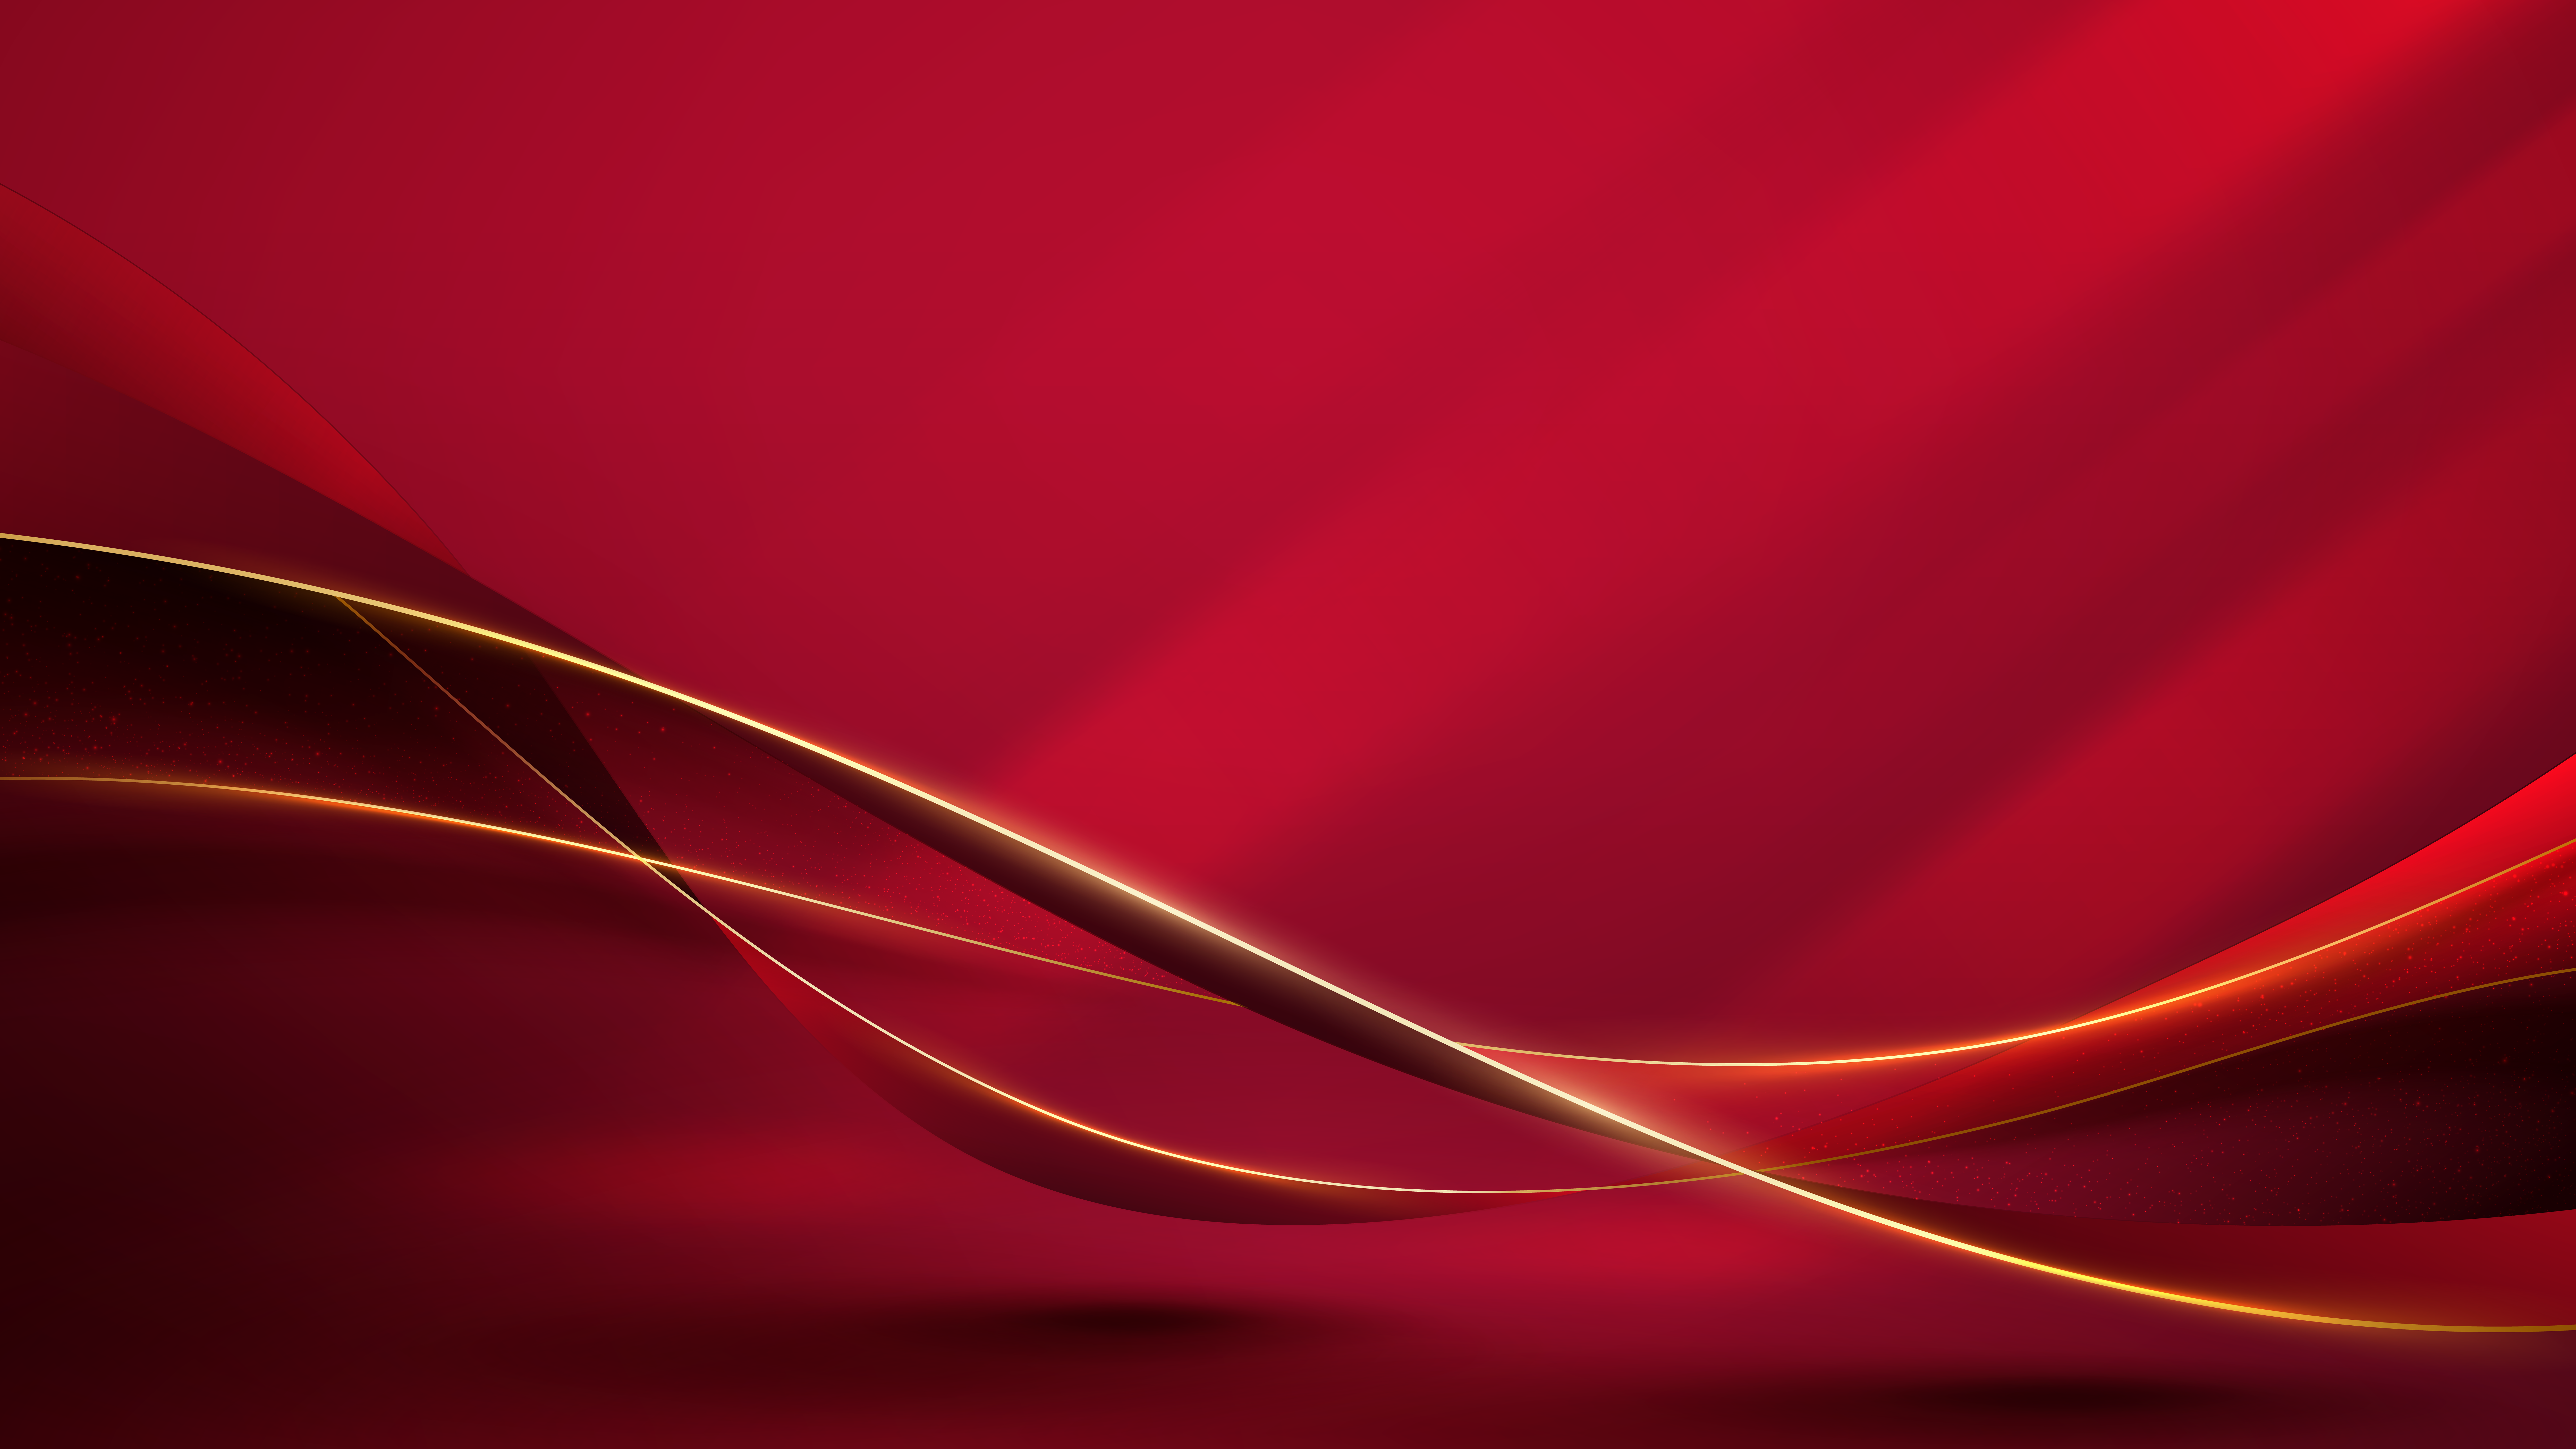 Ribbon against a red background